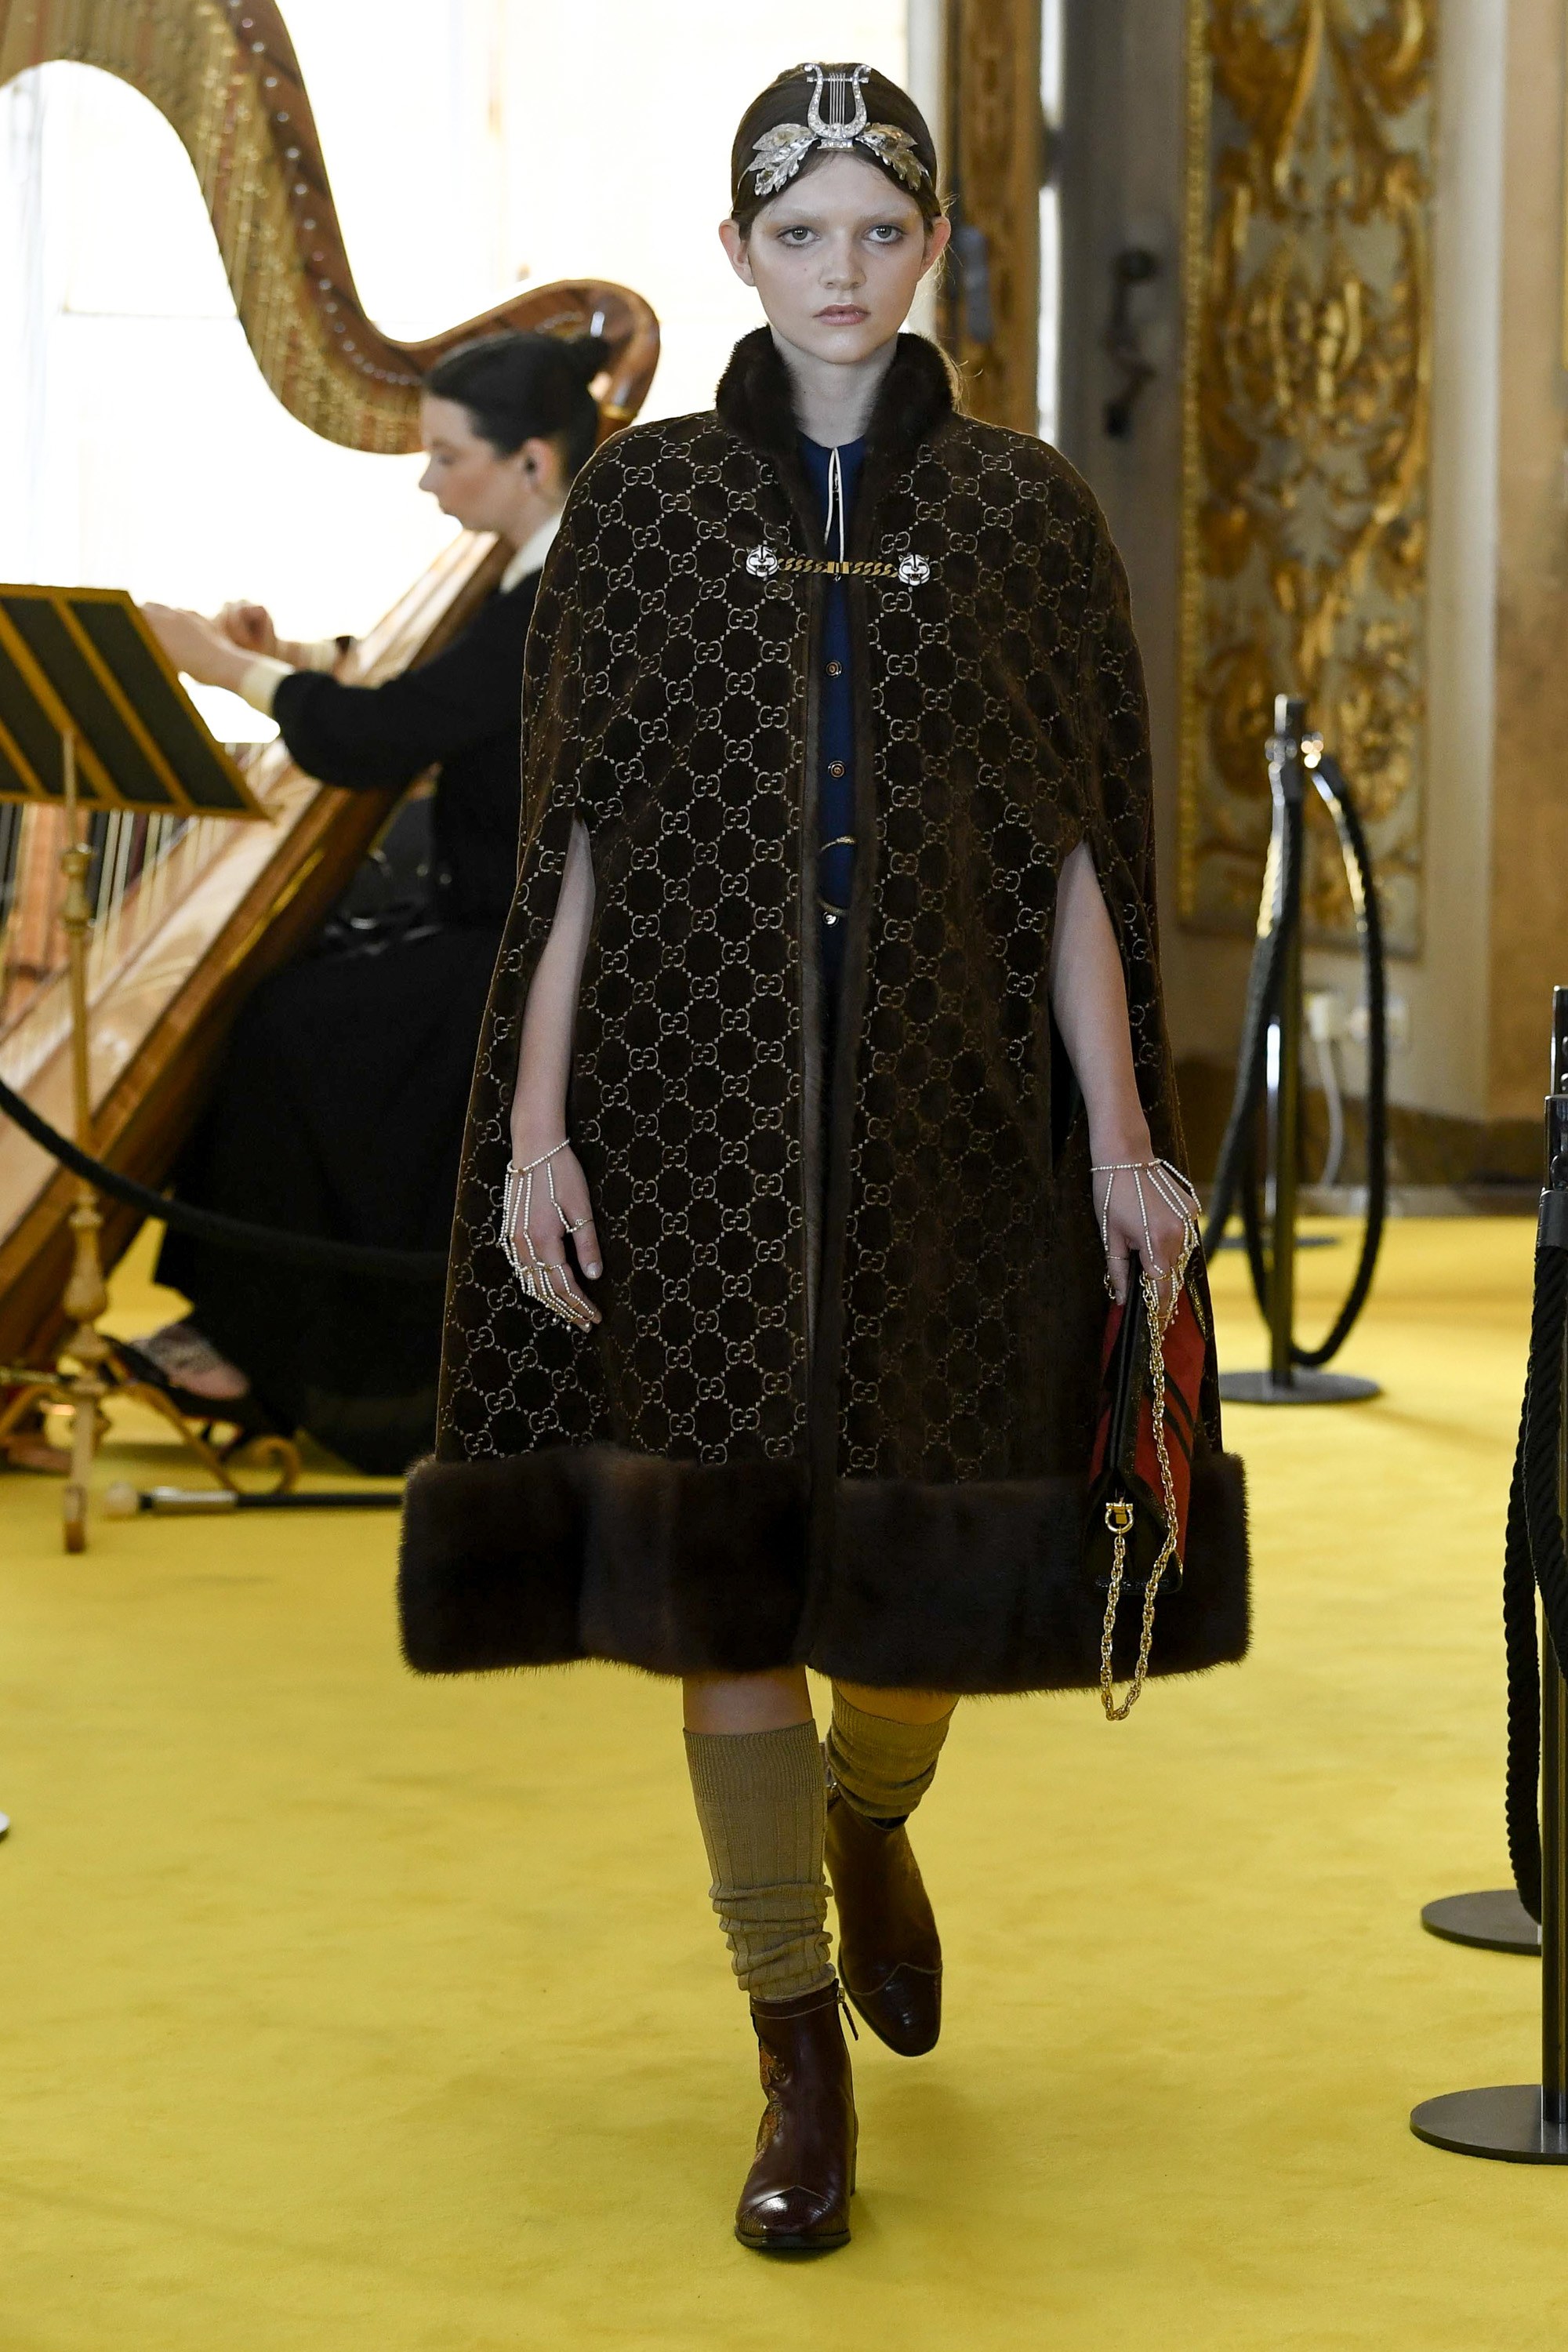 Photo #1a15c from Gucci Cruise  2018